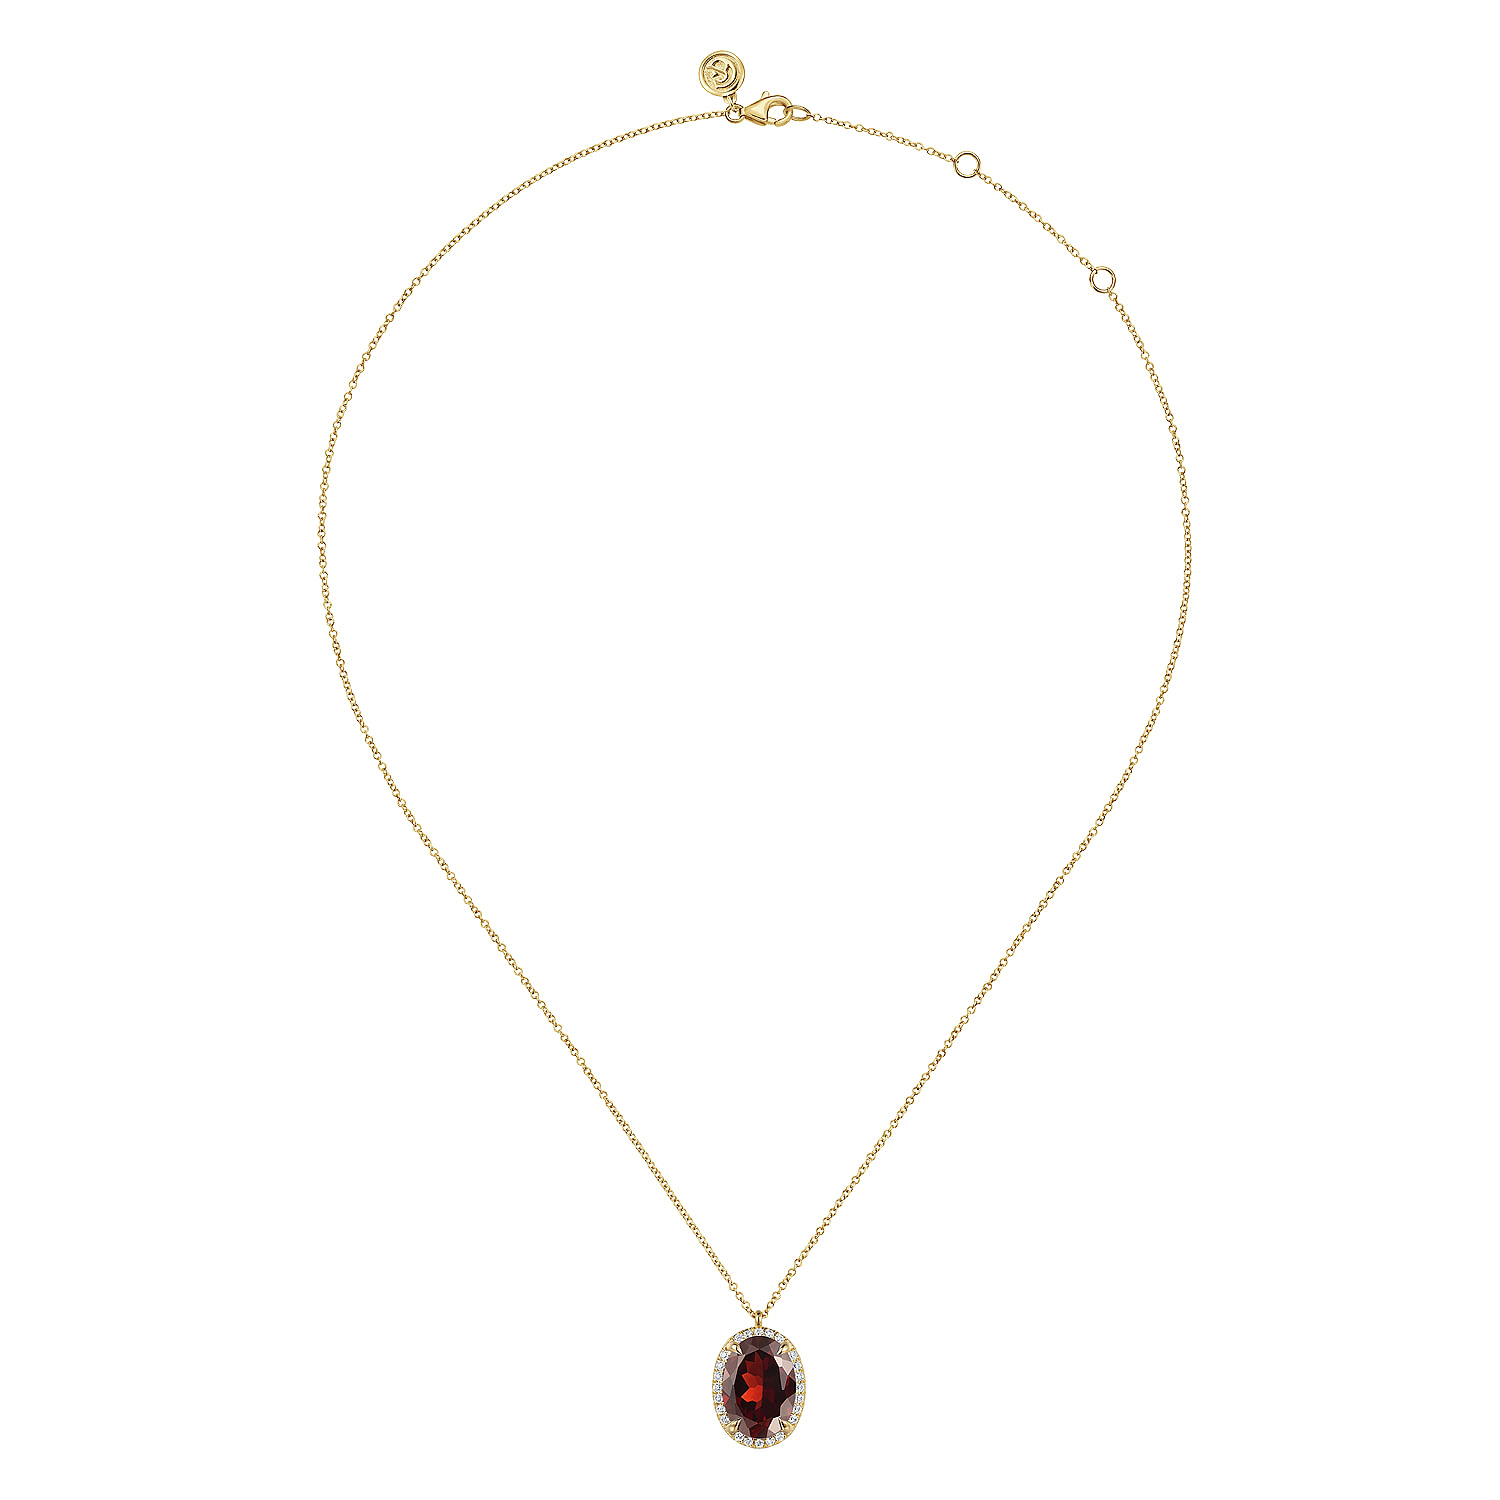 14K Yellow Gold Diamond and Oval Shape Garnet Necklace With Flower Pattern J-Back